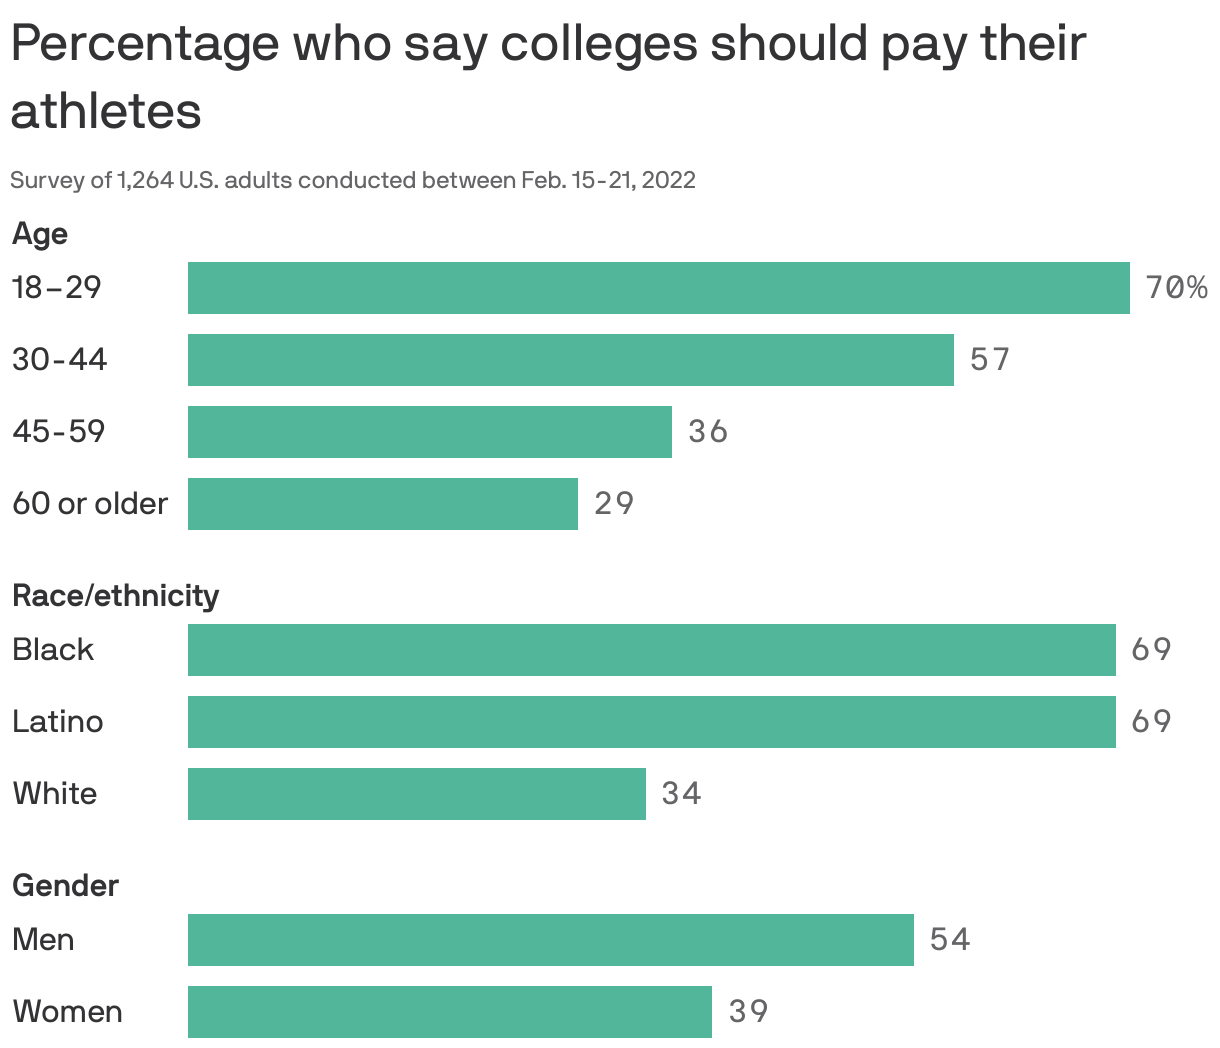 Percentage who say colleges should pay their athletes